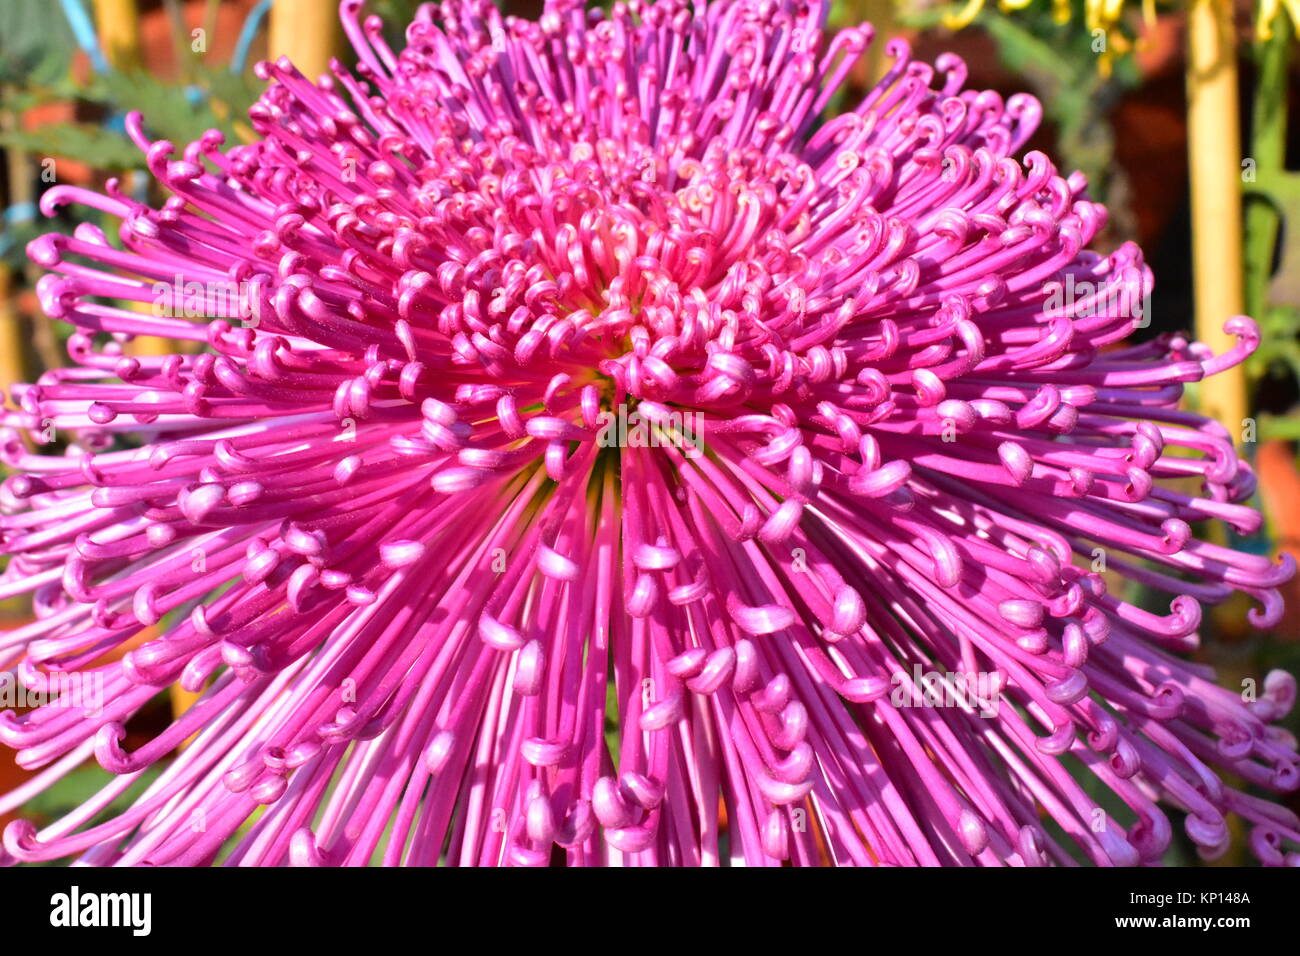 A pink Spider Chrysanthemum in full bloom at the Annual Chrysanthemum Show at Terraced Garden, Chandigarh, India. Stock Photo